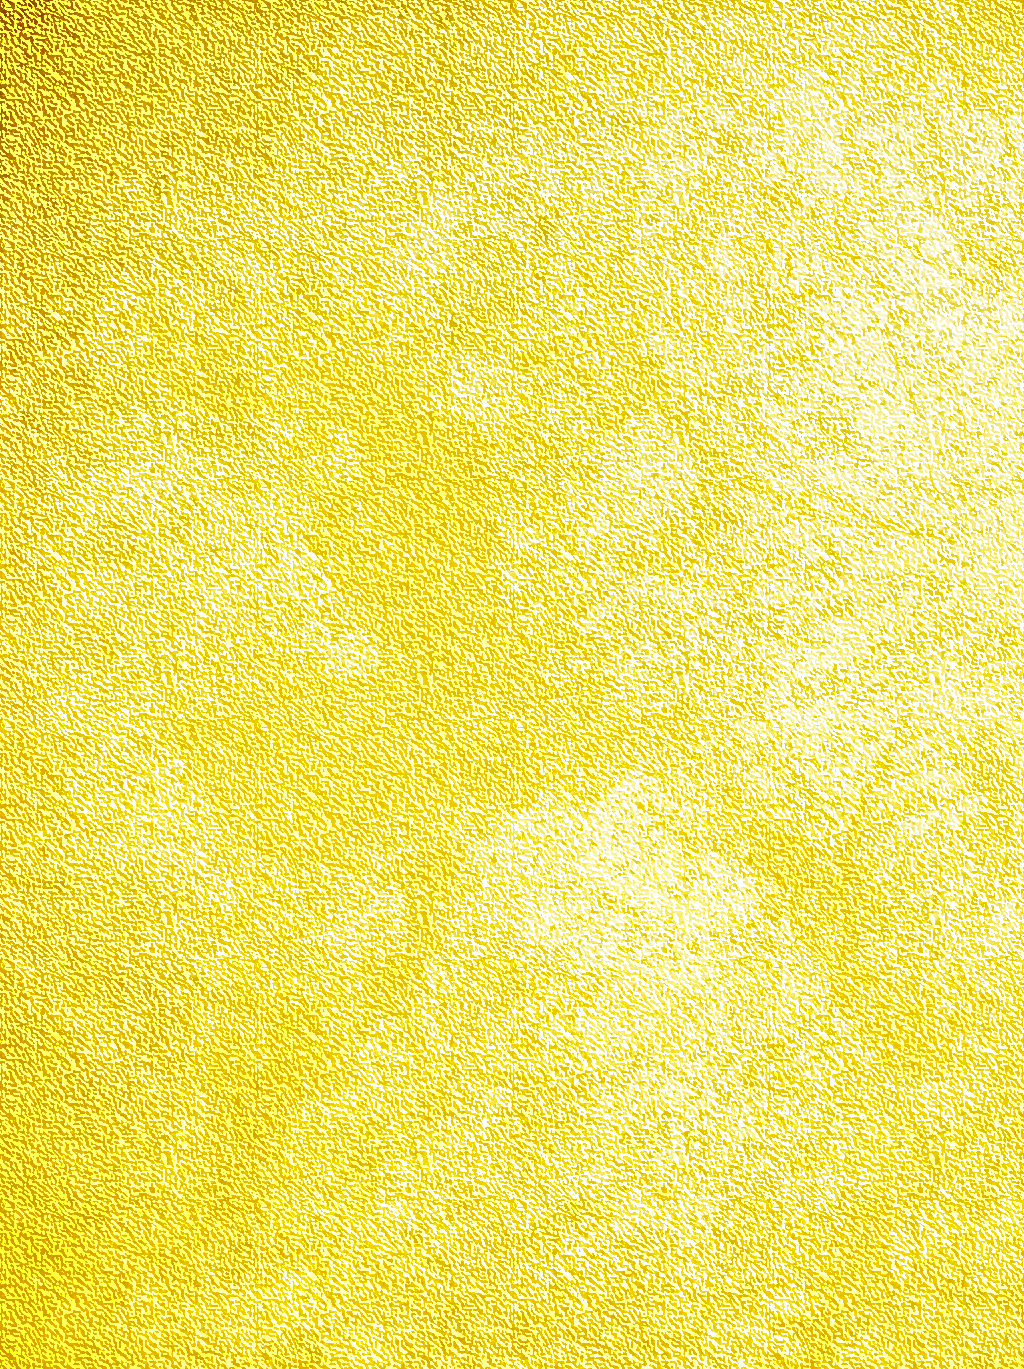 Yellow Texture Background - FREE Vector Design - Cdr, Ai, EPS, PNG, SVG